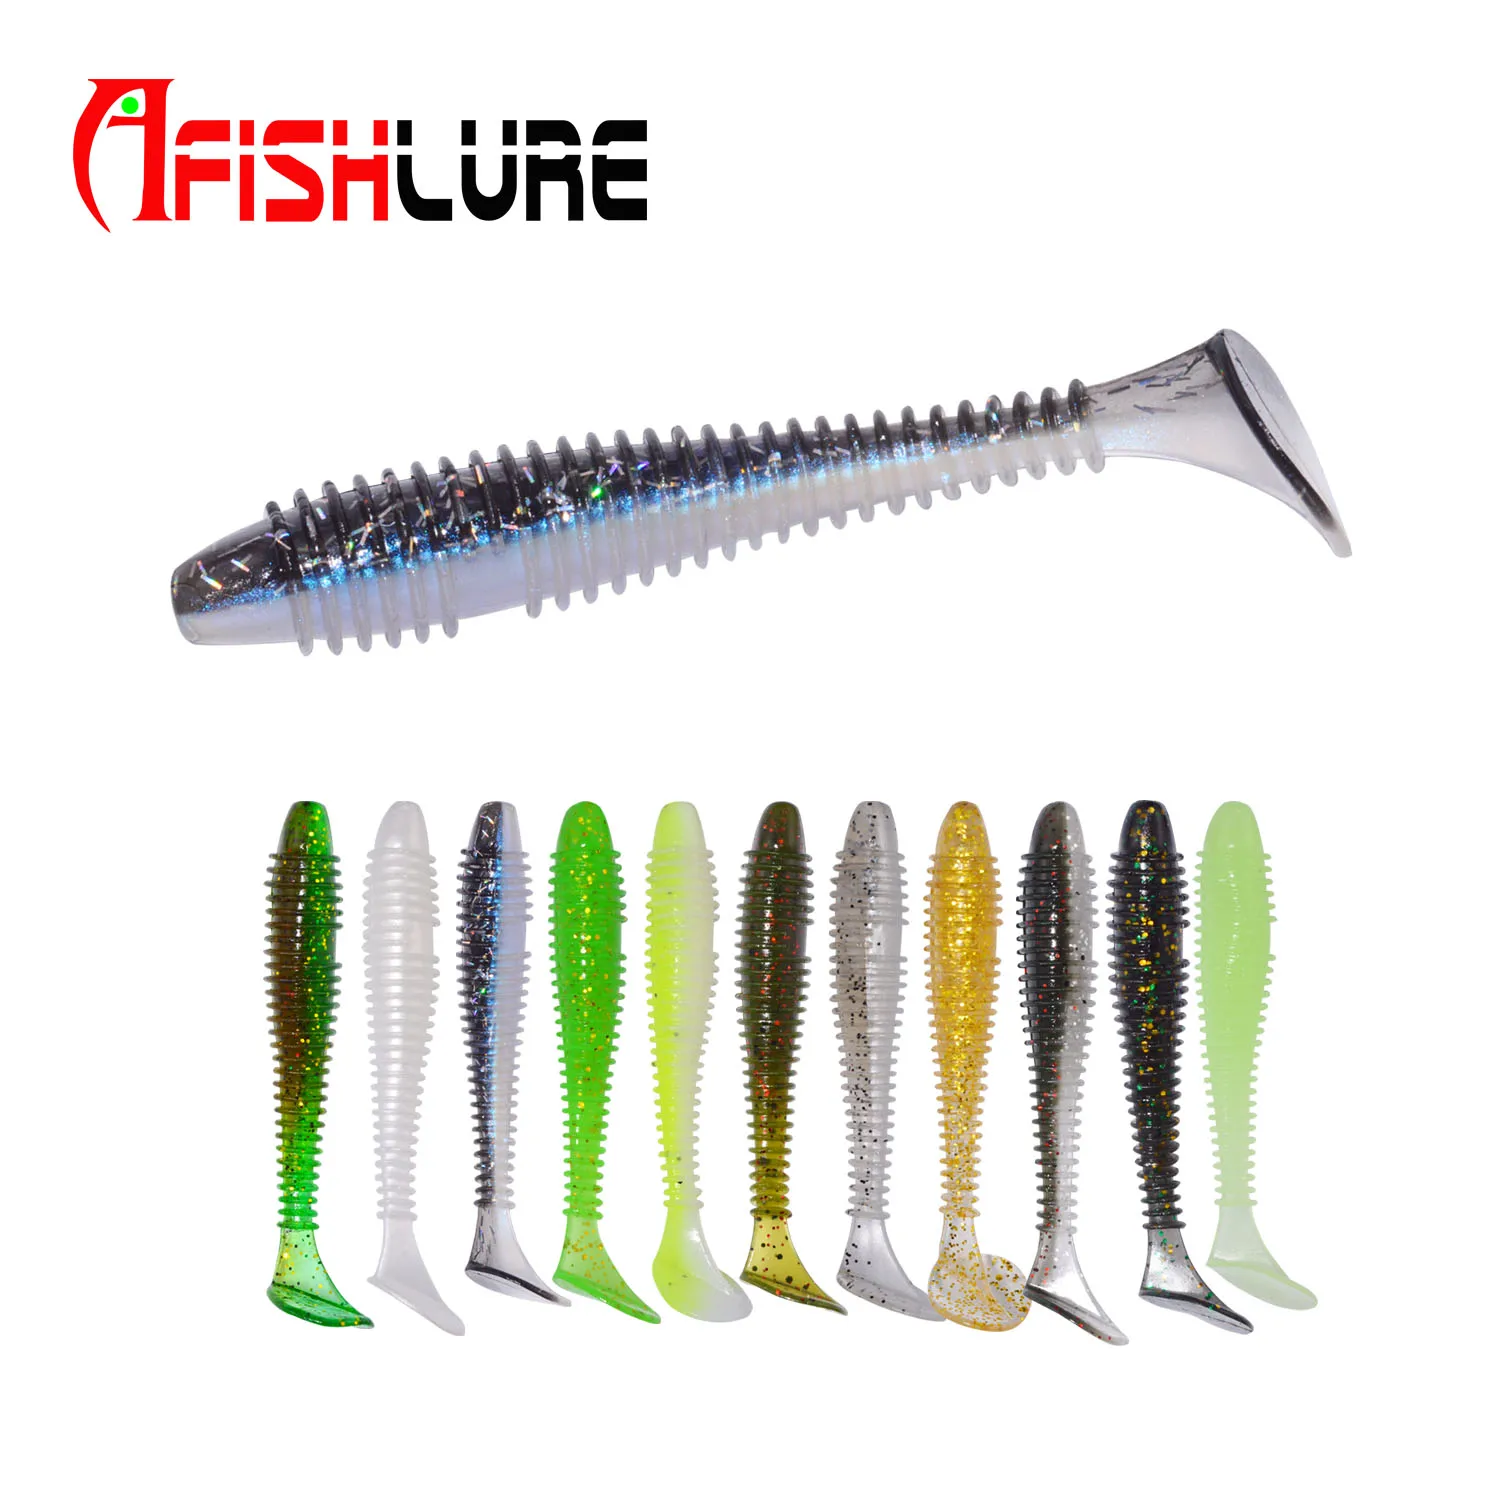 

AfishlureT Tail Soft Fishing Lure 70mm 2.9g 12pcs SwimBait Paddle Tail Worm Fishing Bait Small T Tail Soft Bionic Grub Bait, 11 colors for choice